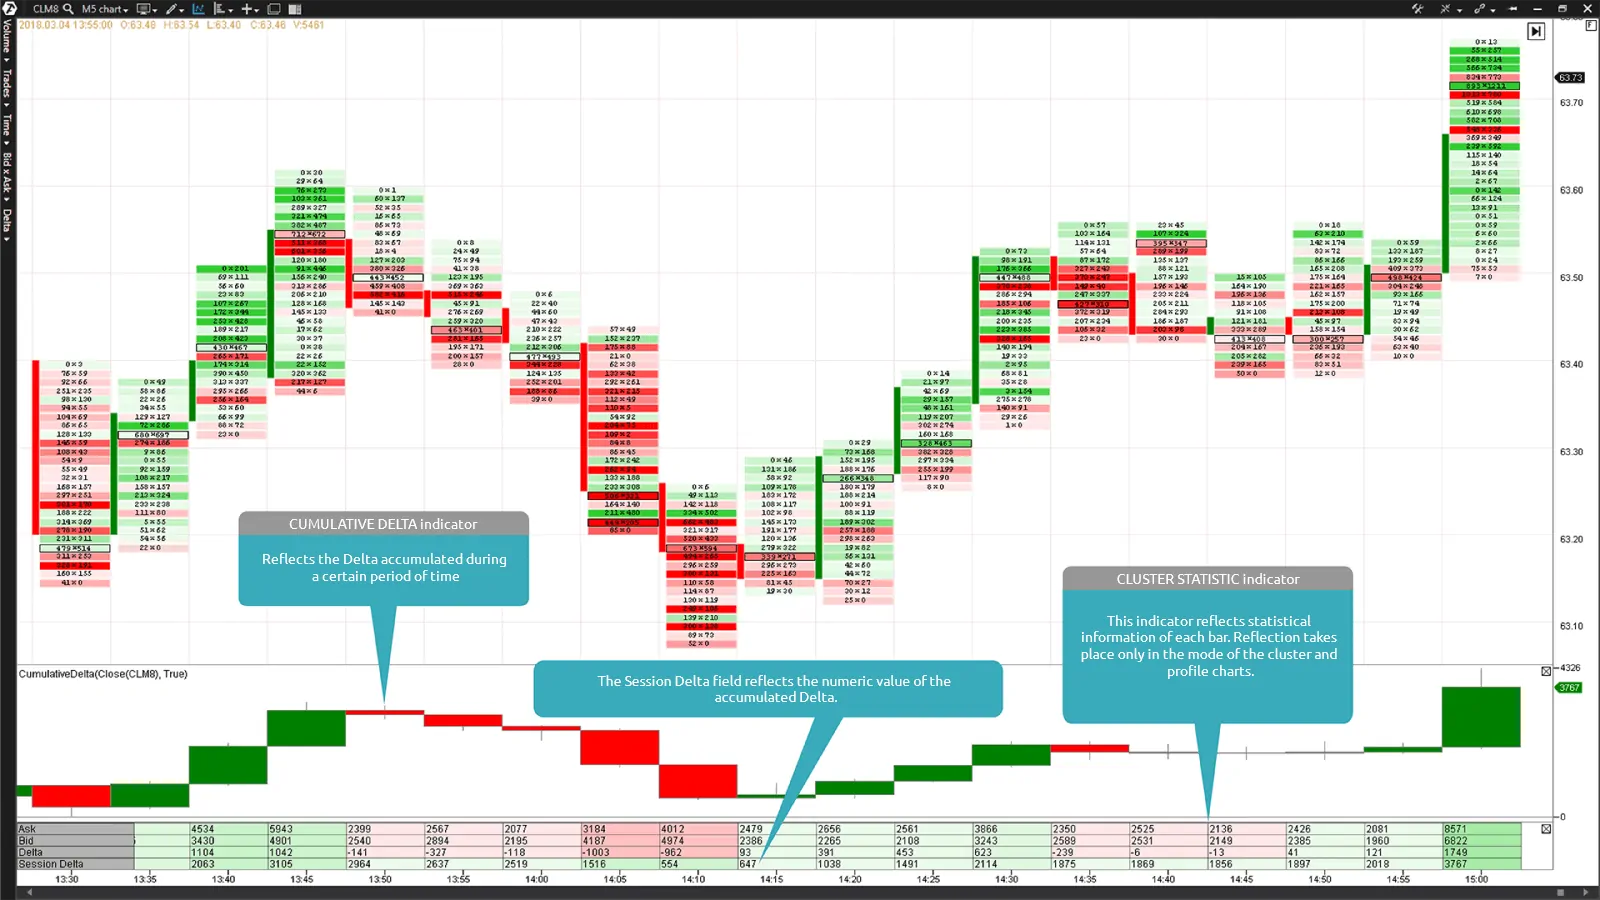 The Bid x Ask Footprint chart and Cumulative Delta and Cluster Statistic indicators in the lower part of the chart